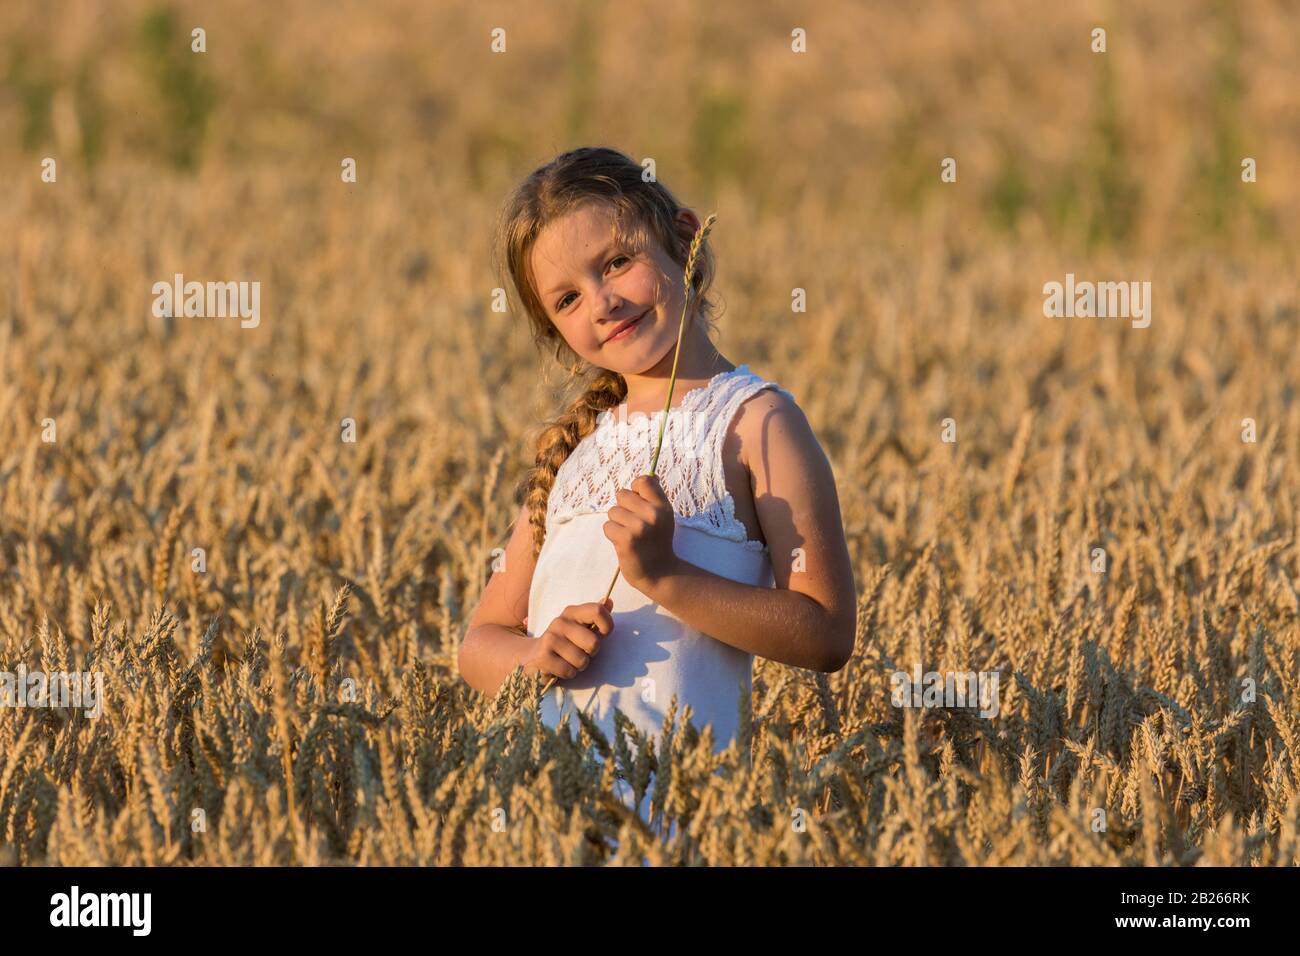 Girl on a wheat field Stock Photo